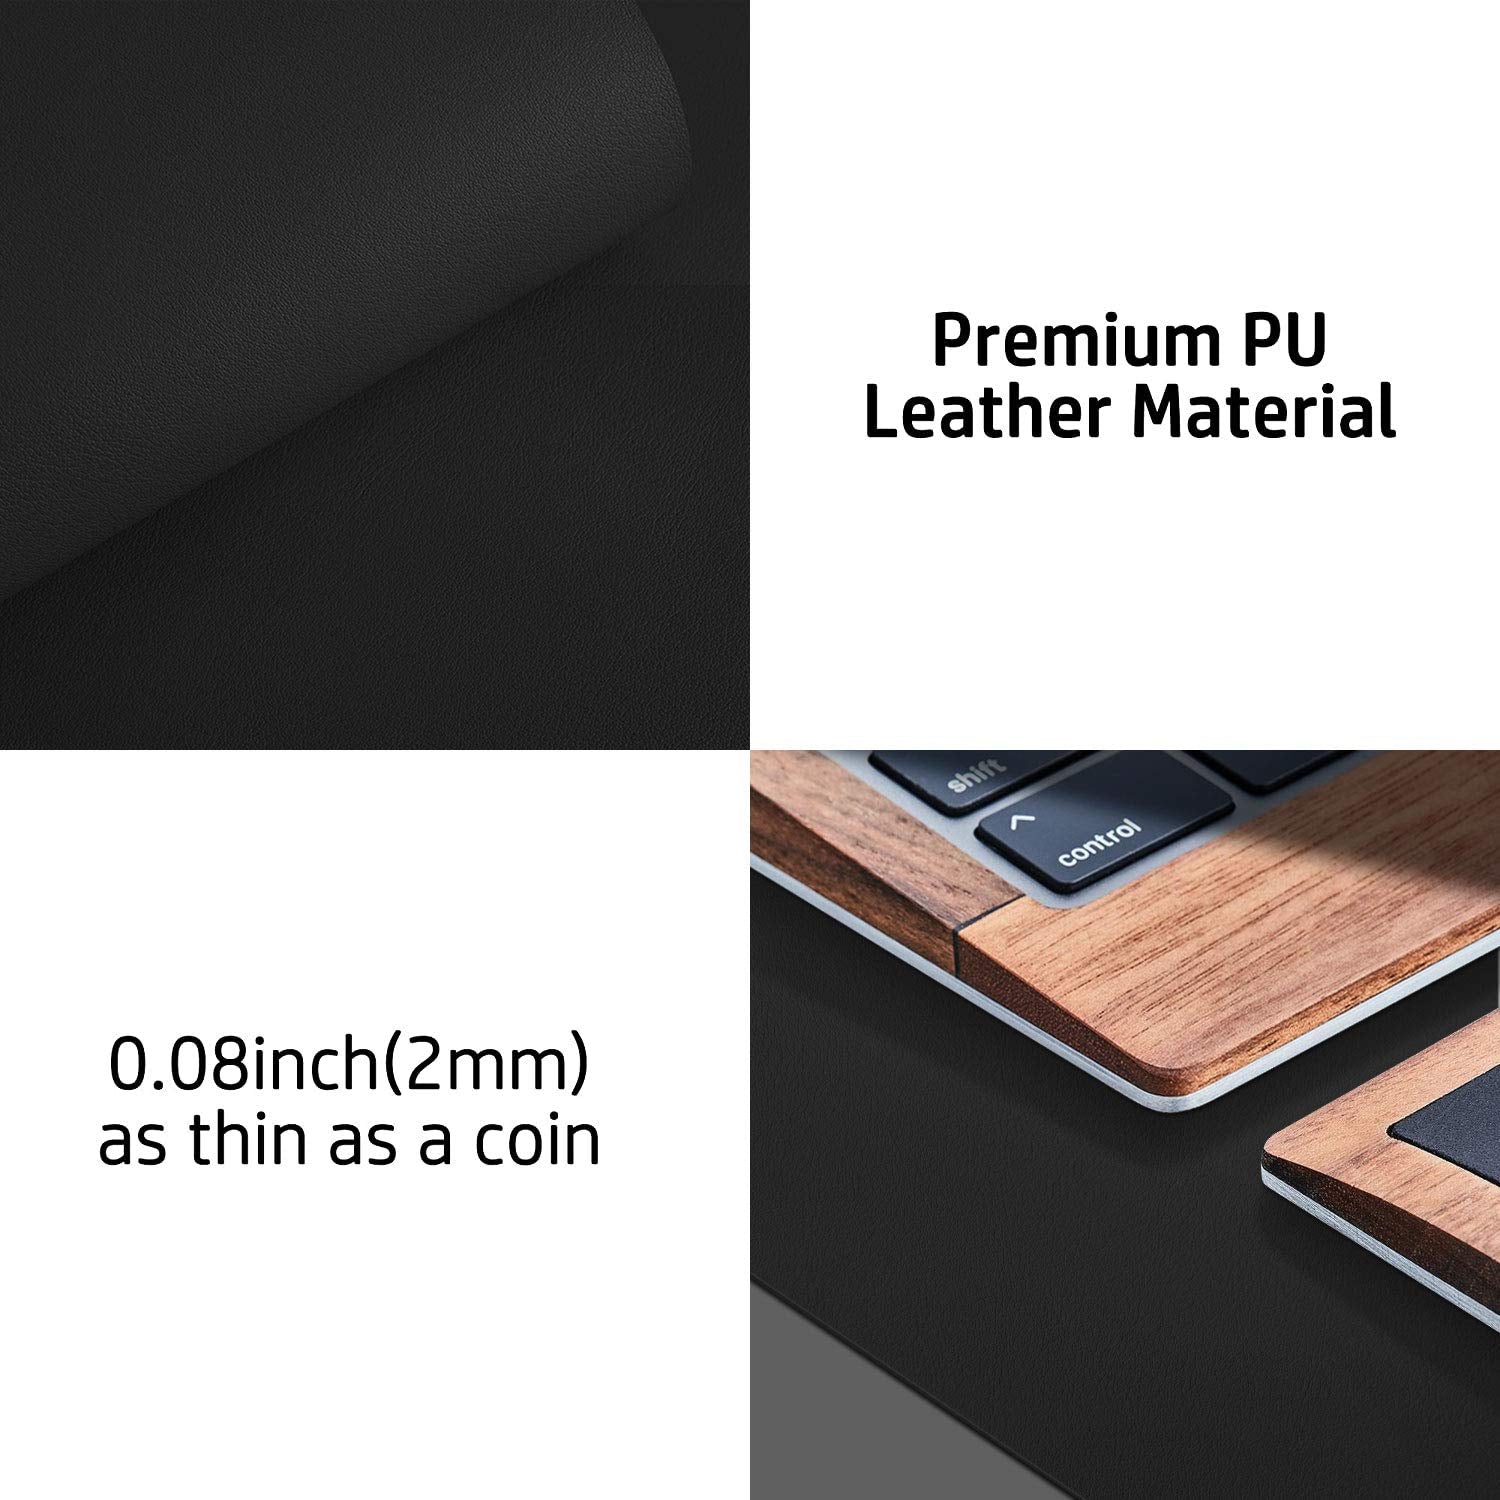 Leather Desk Pad Protector,Mouse Pad,Office Desk Mat,Non-Slip PU Leather Desk Blotter,Laptop Desk Pad,Waterproof Desk Writing Pad for Office and Home (80cm x 40cm, Black)